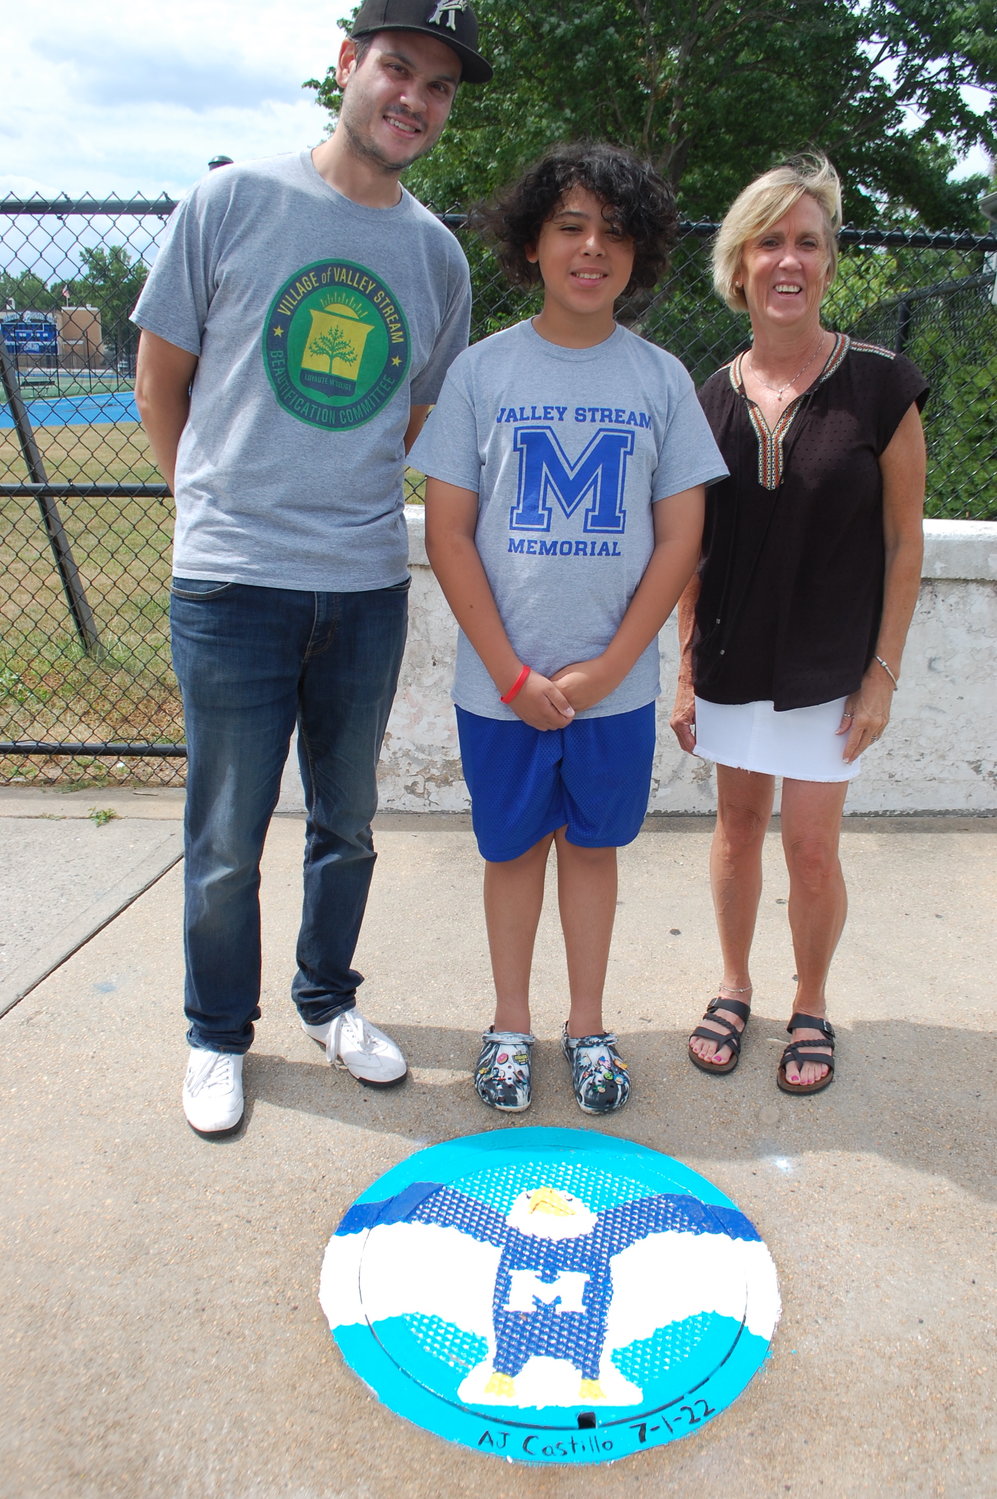 Memorial 8th grader AJ Castillo, center, with Valley Stream Beautification Committee Chairman, Kevin Waszak, left, and art teacher Darla Collins.